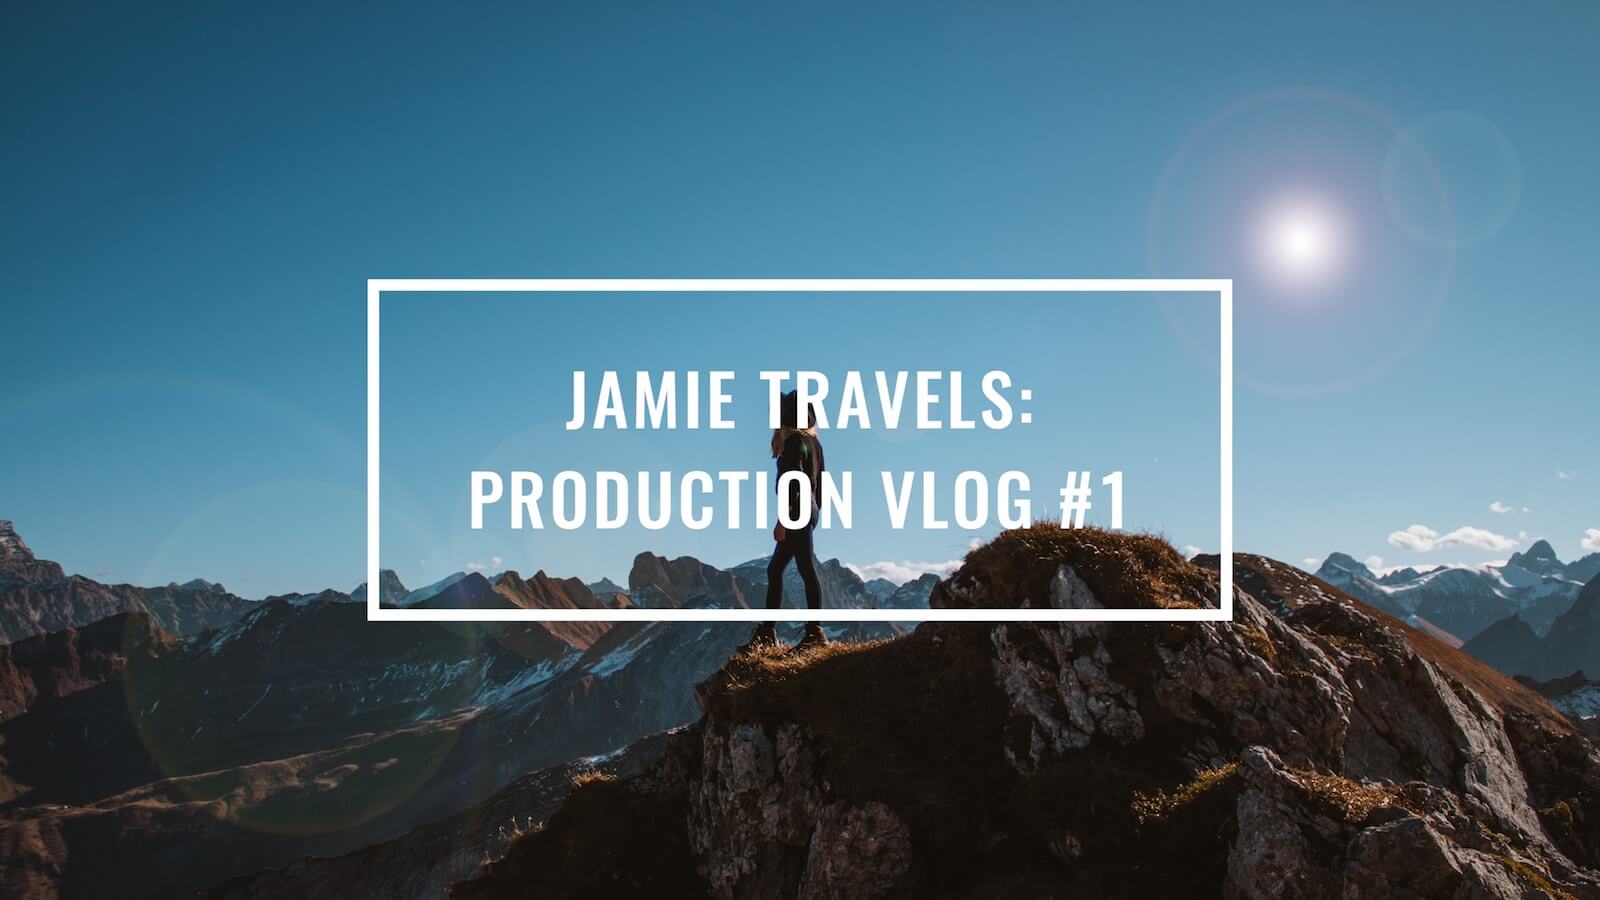 Youtube Intro Templates You Need For Your Channel [FREE Template] - Adobe Premiere Pro - Jamie's Vlog - StudioBinder